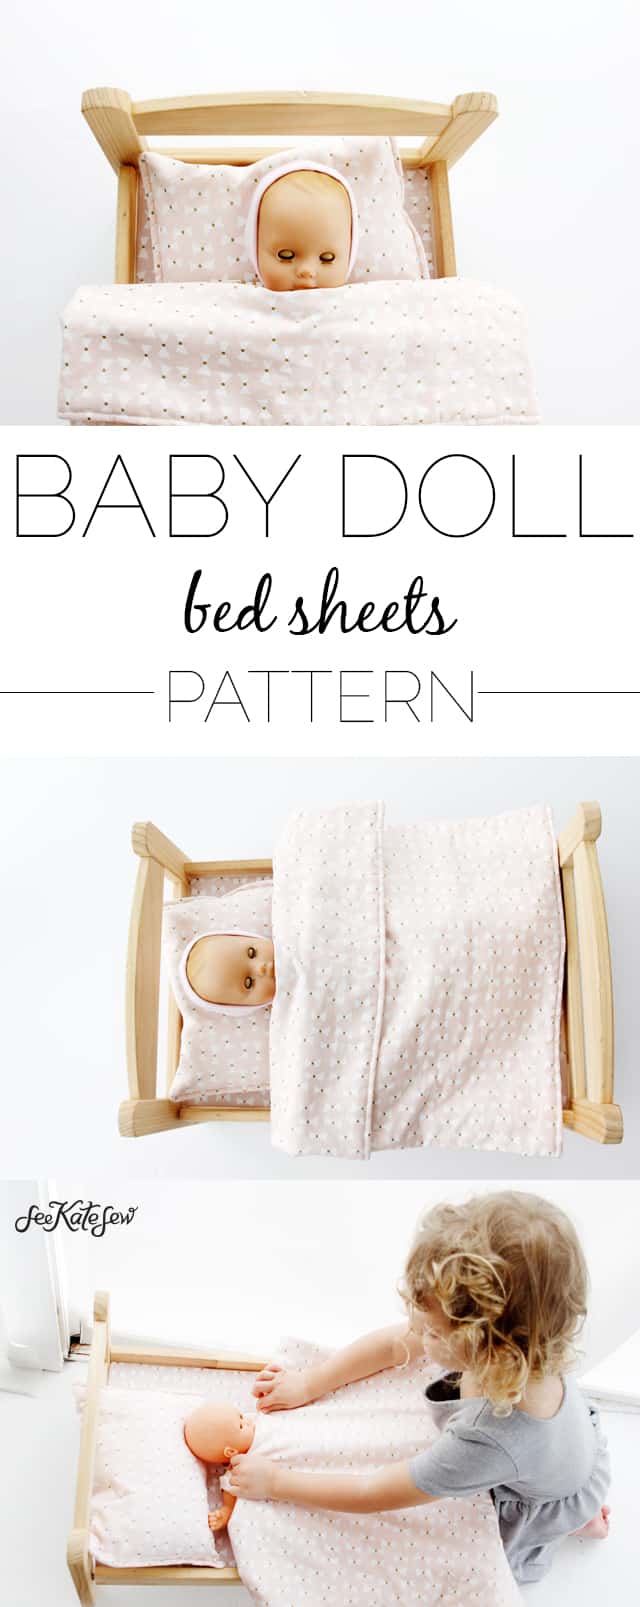 Doll Sheets Pattern | See Kate Sew